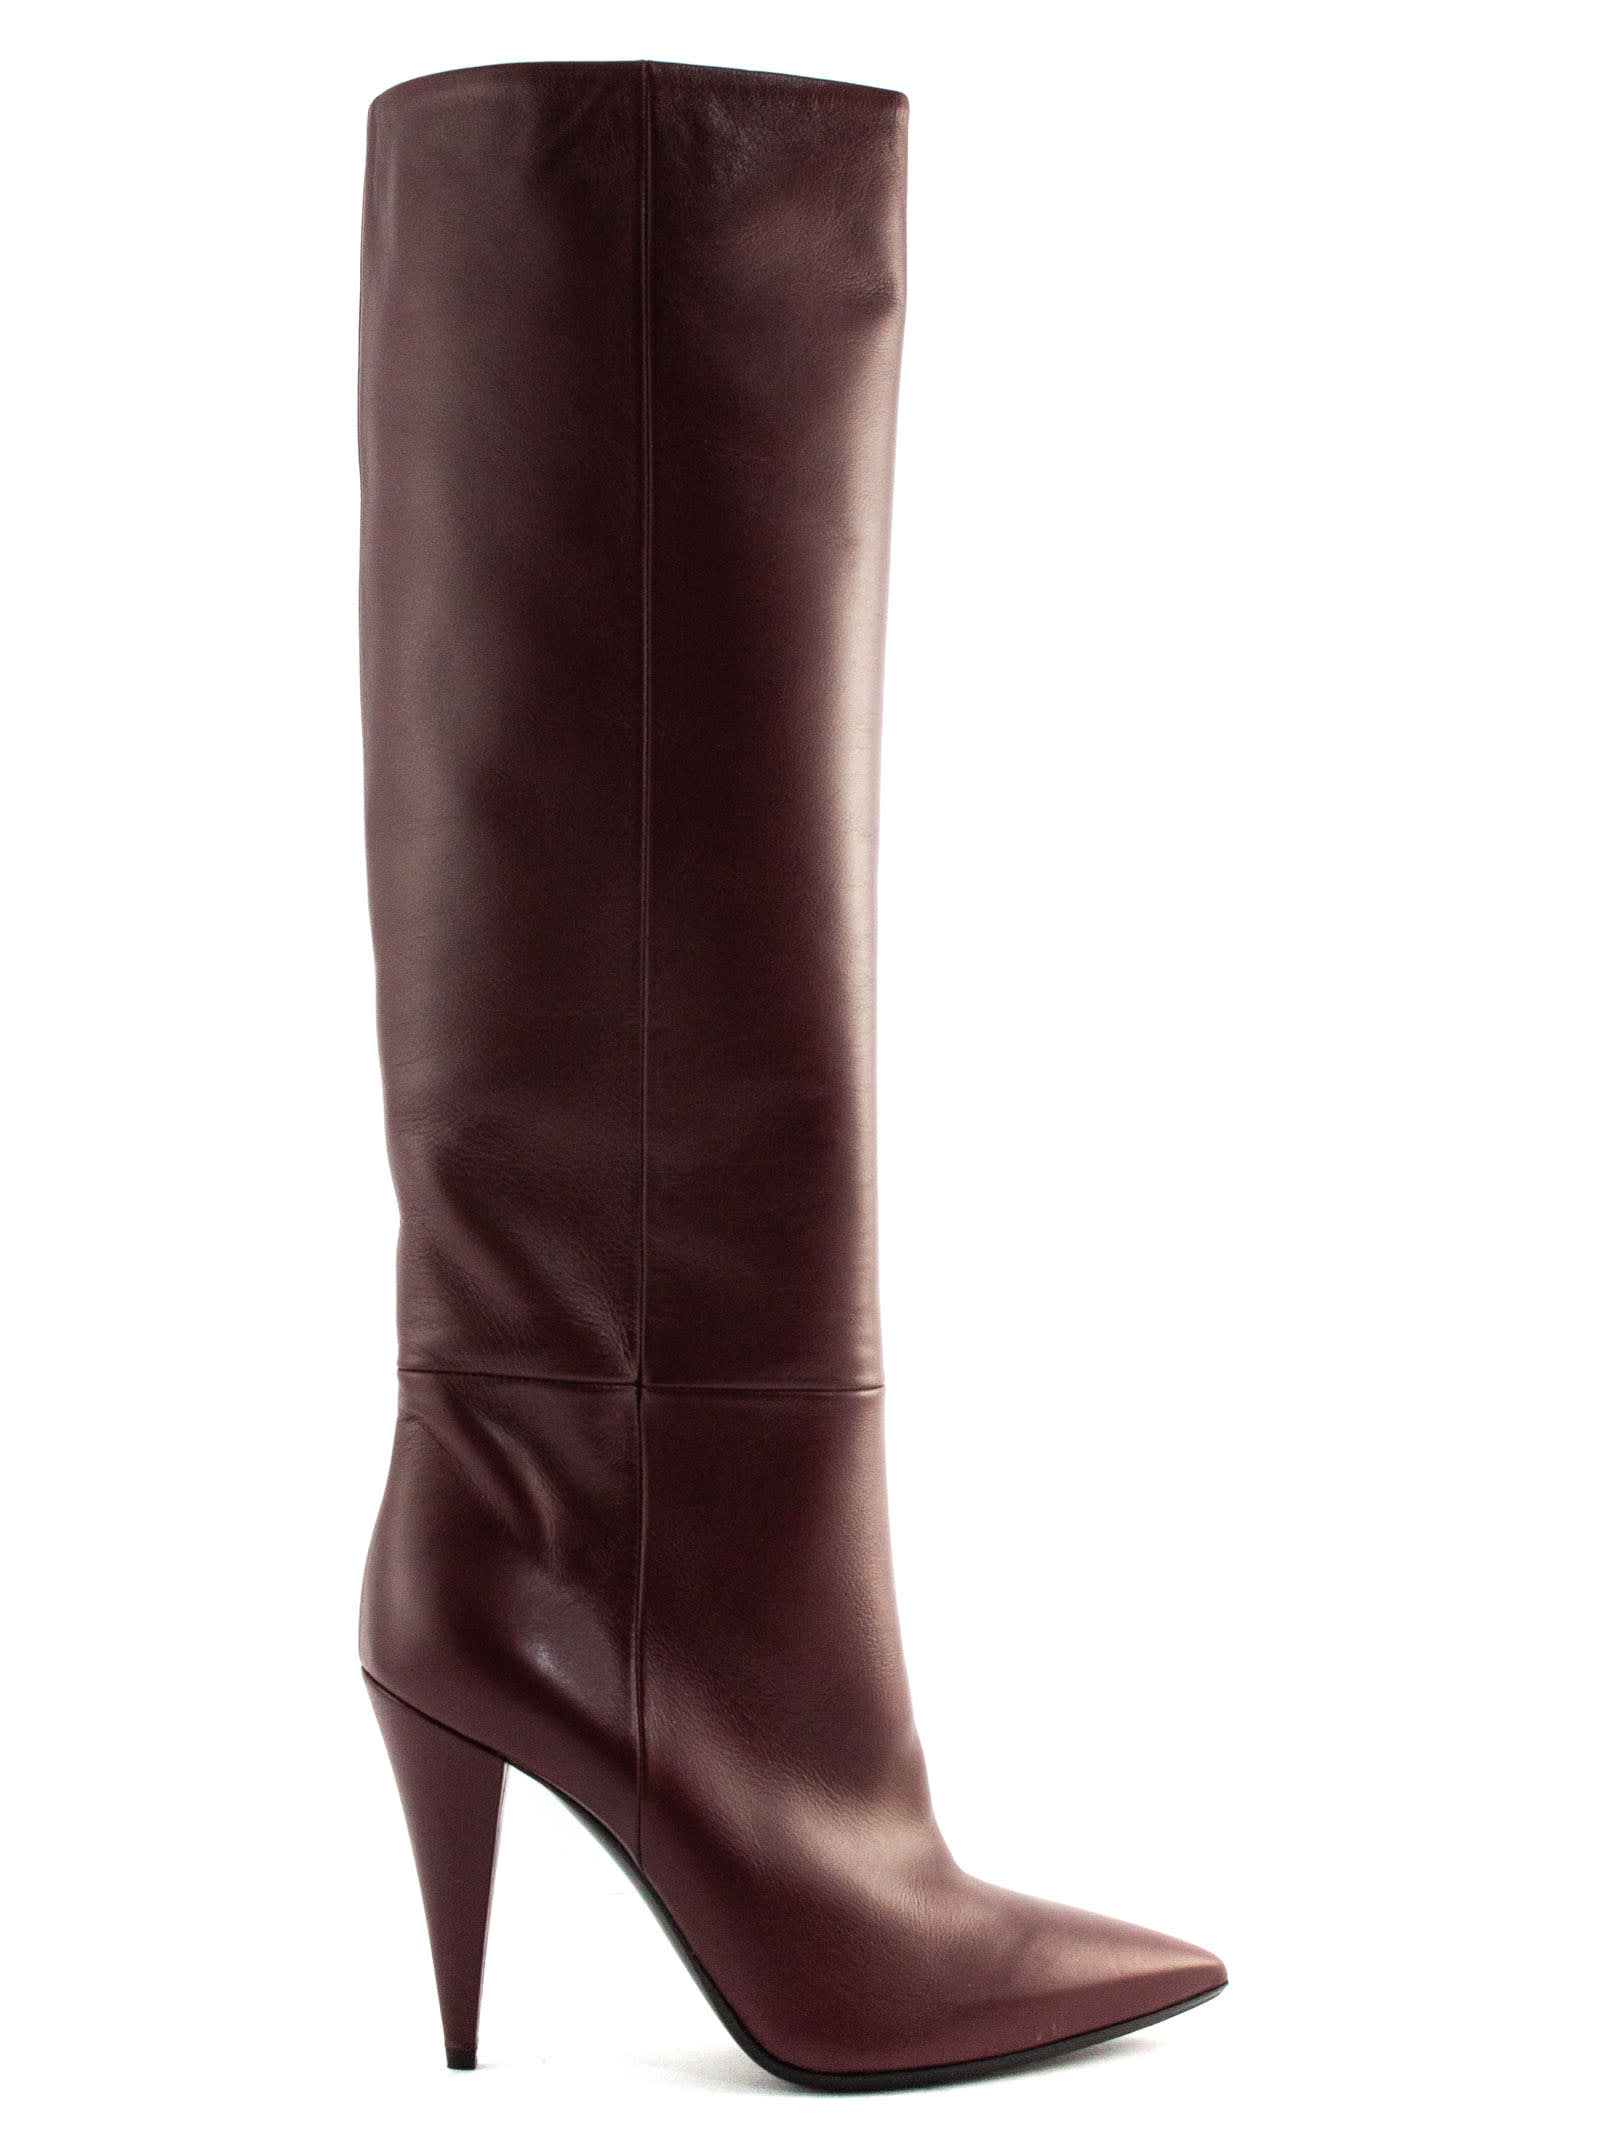 Strategia Bordeaux Leather High Boots